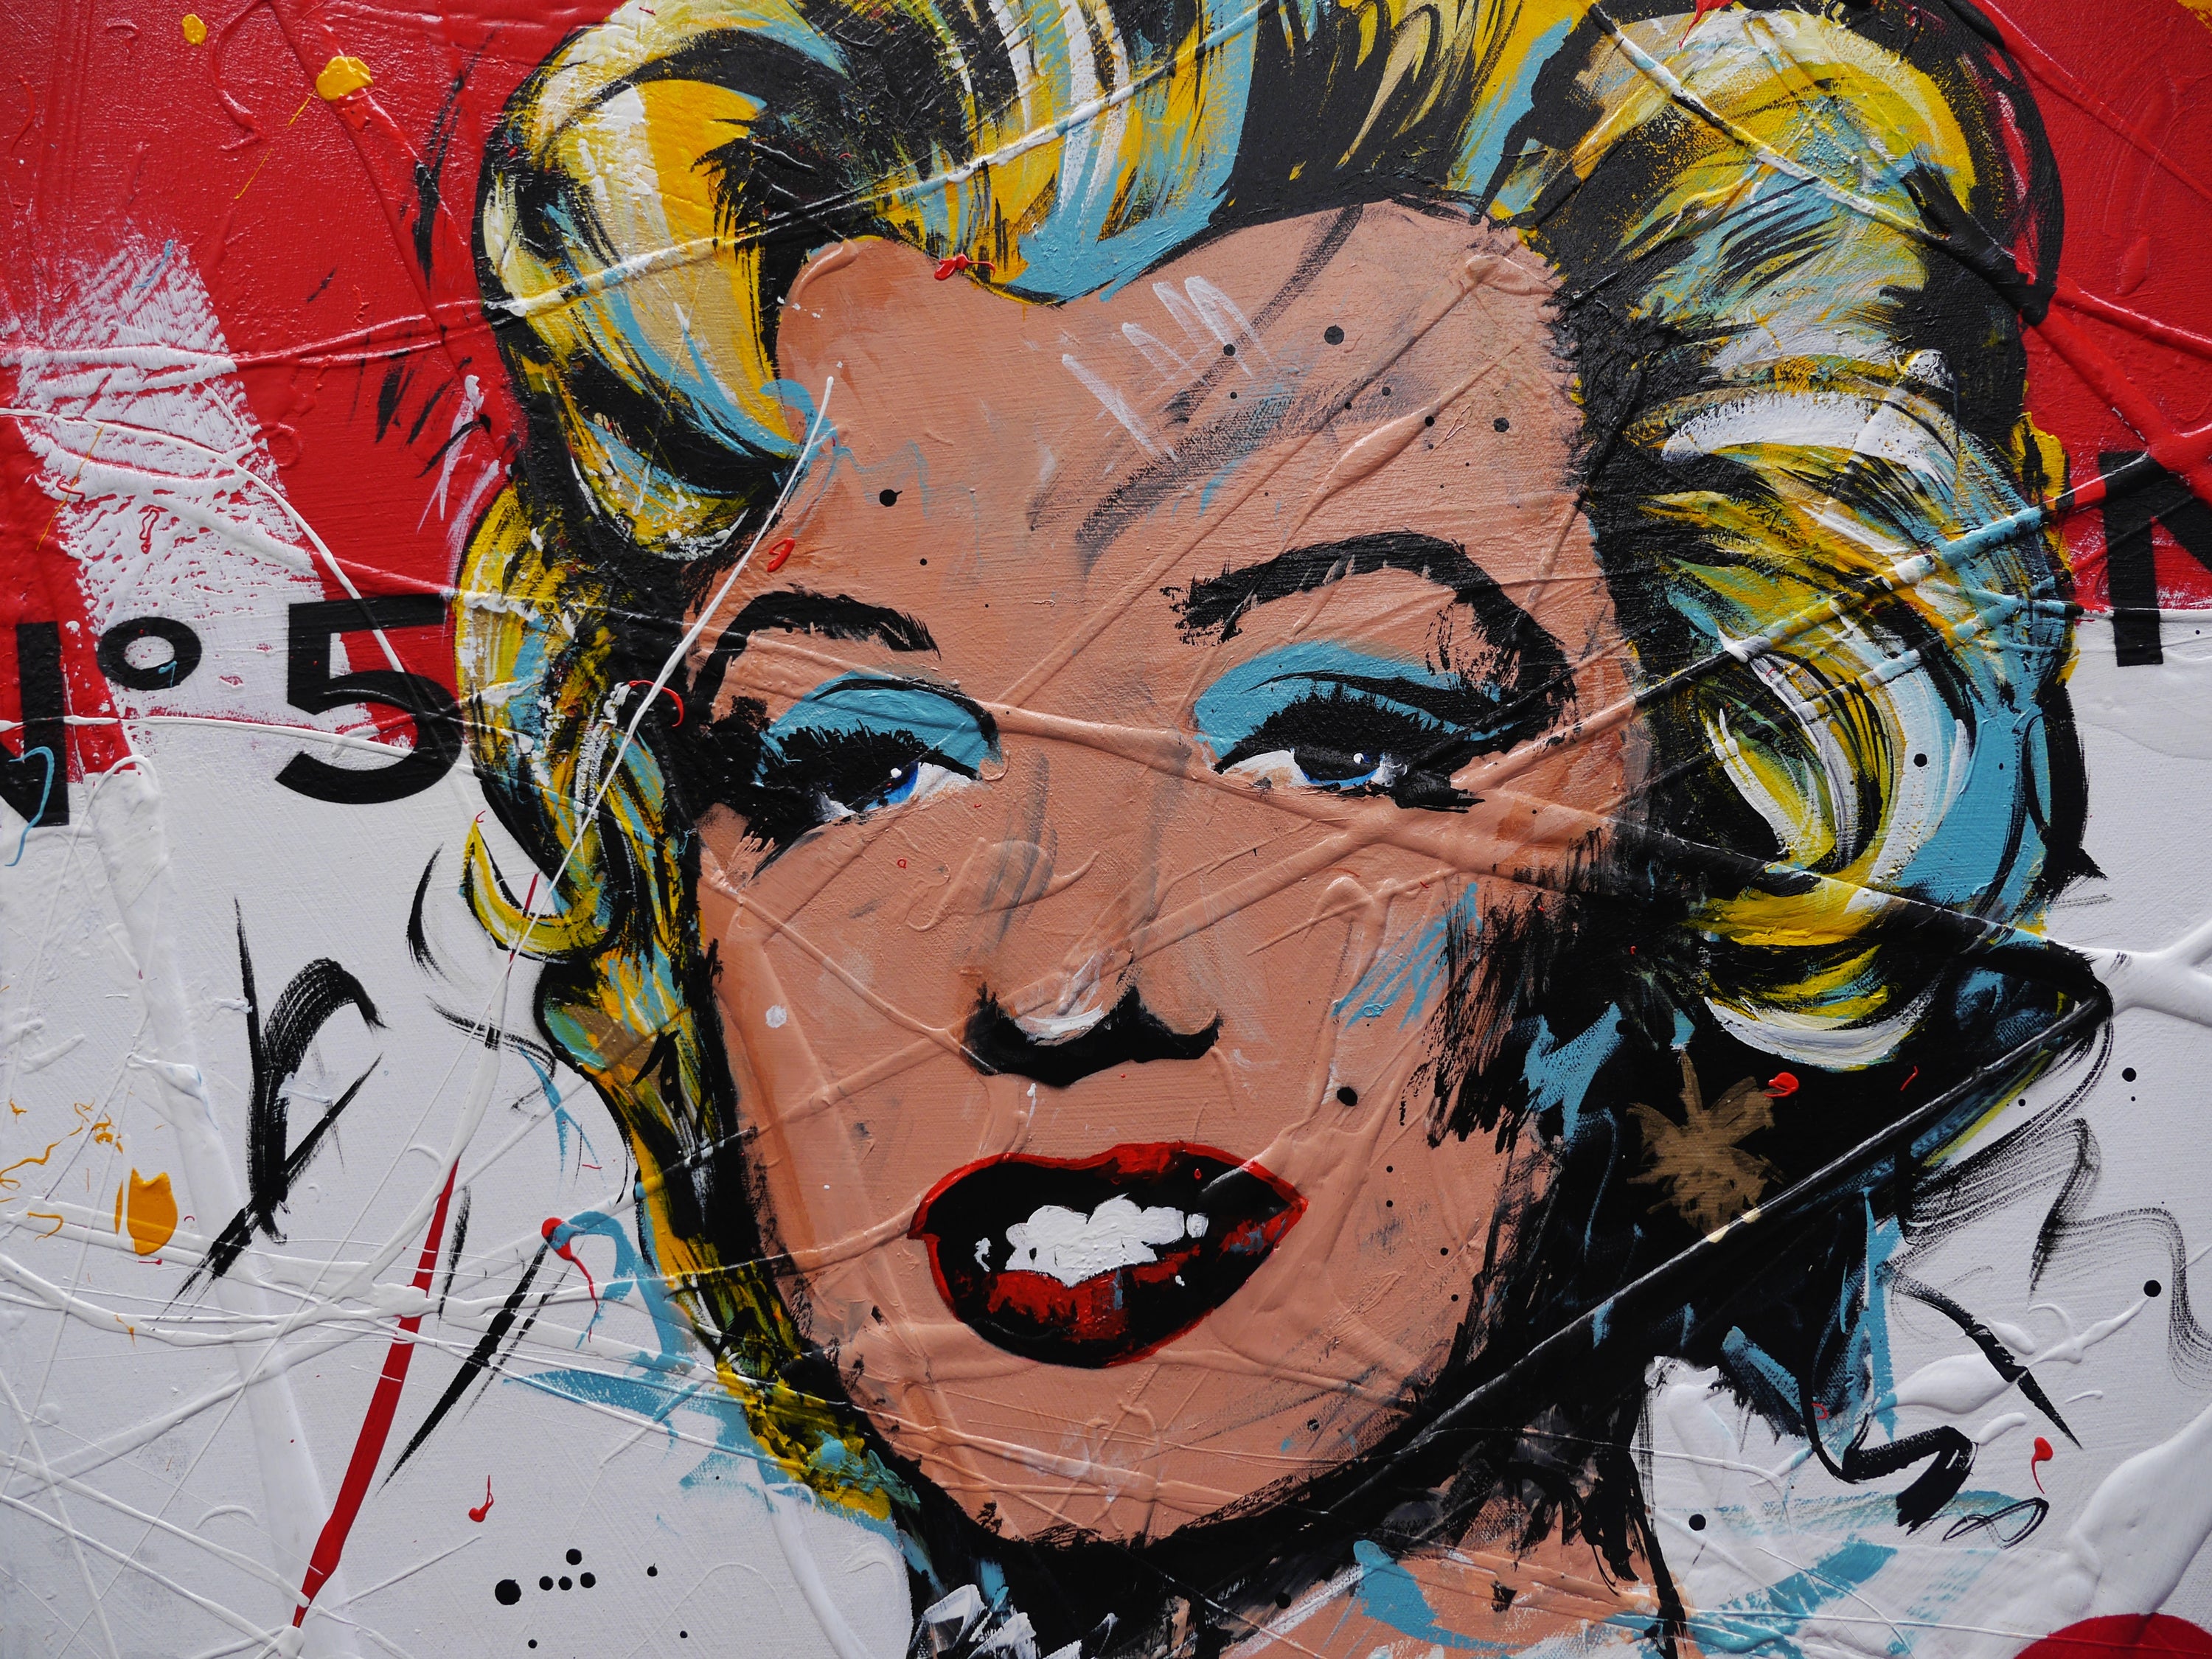 Condensed Marilyn 140cm x 100cm Campbell's Soup Textured Urban Pop Art Painting